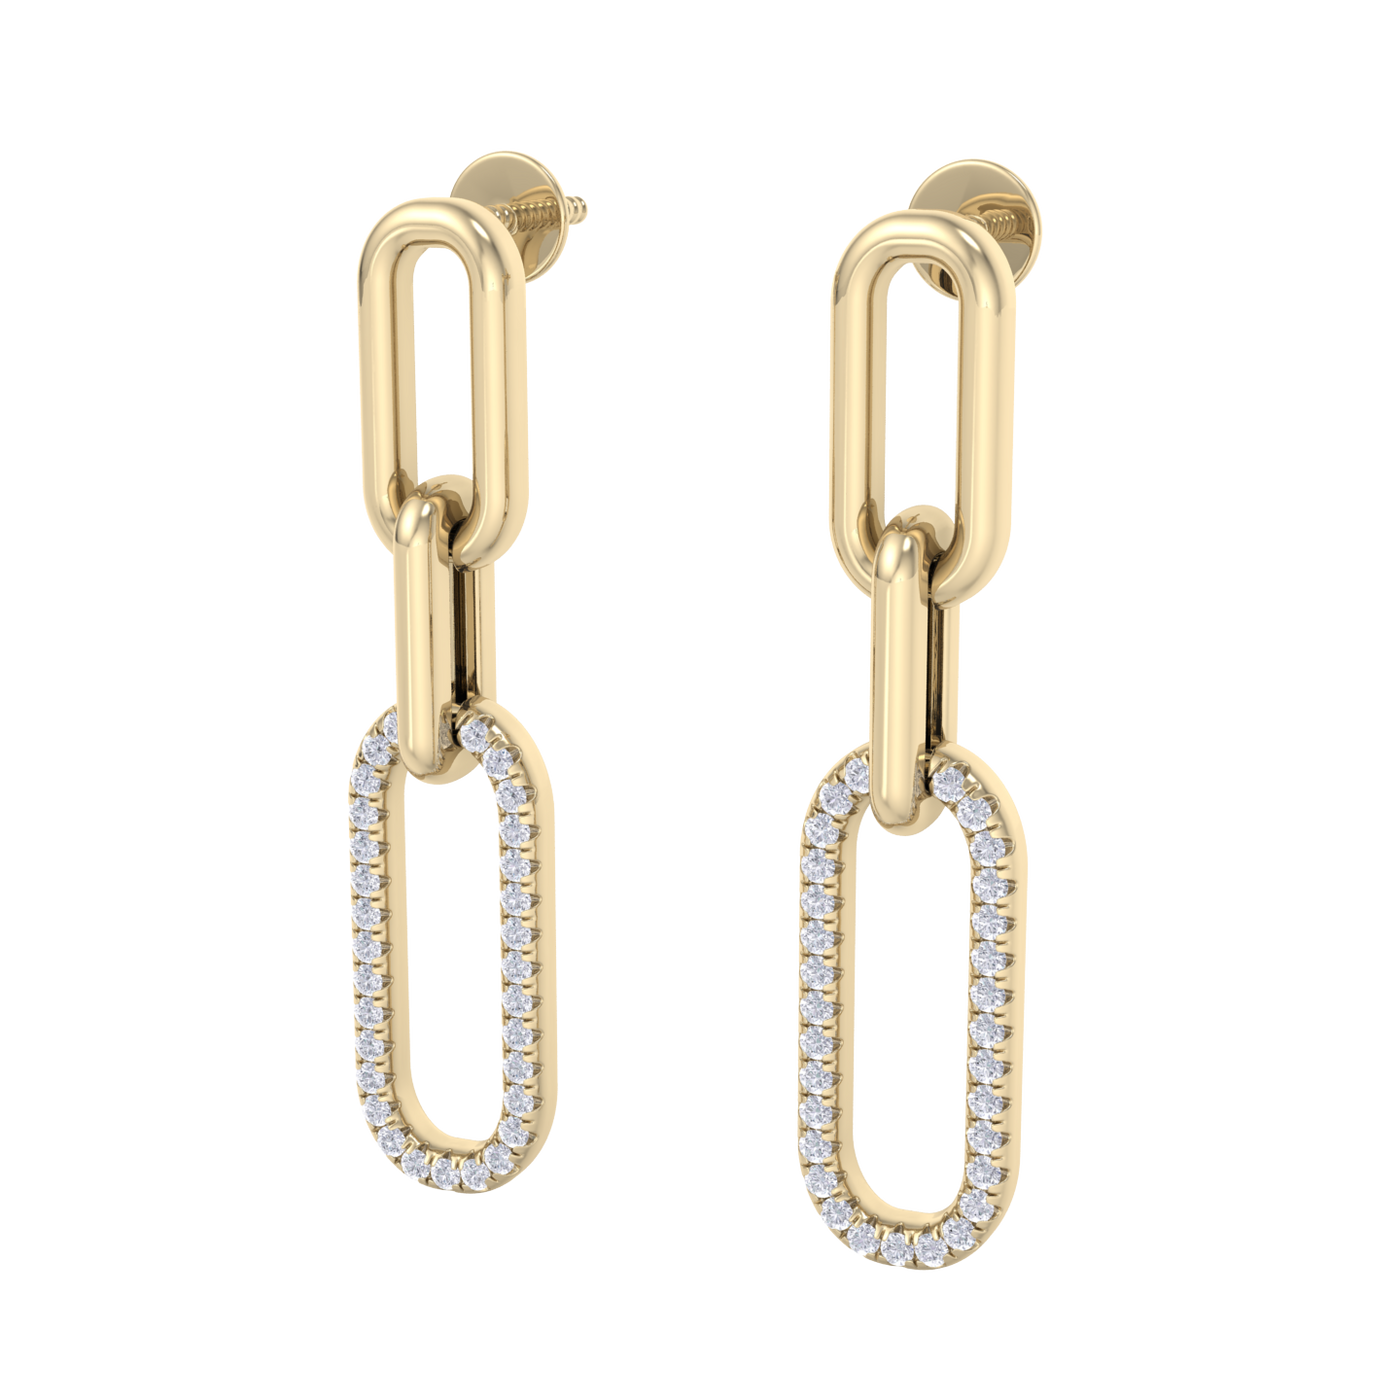 Diamond chain link earrings in white gold with white diamonds of 0.25 ct in weight